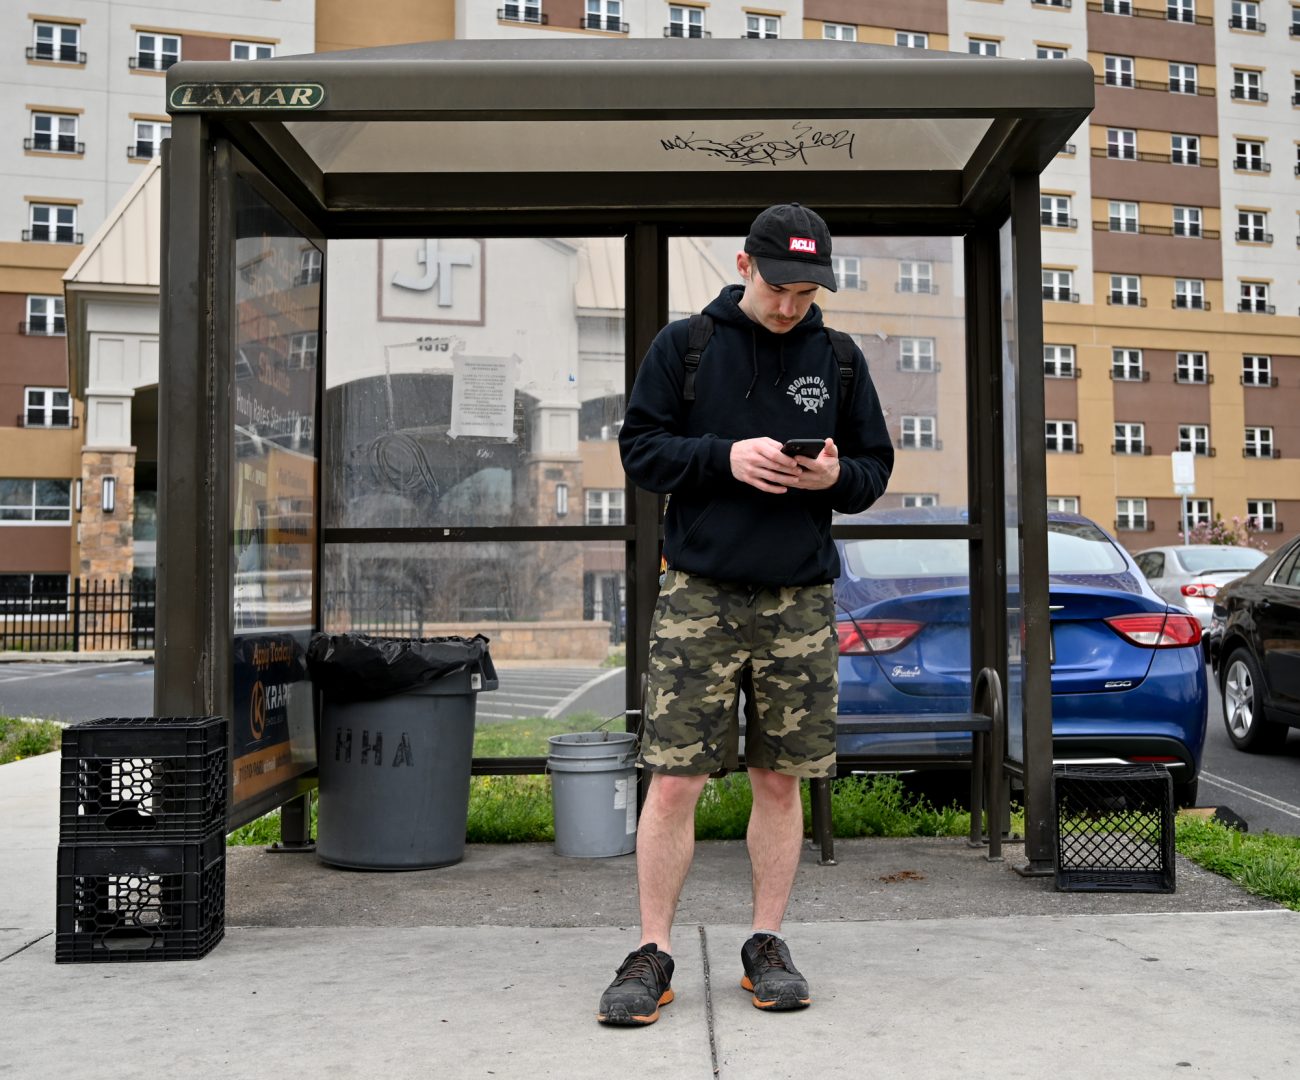 Nathan Lund, 30, a Harrisburg resident, waits for the bus on April 13, 2022. He takes a Capital Area Transit bus from N. 6th and Calder streets to the Amazon fulfillment center in Carlisle where he works.